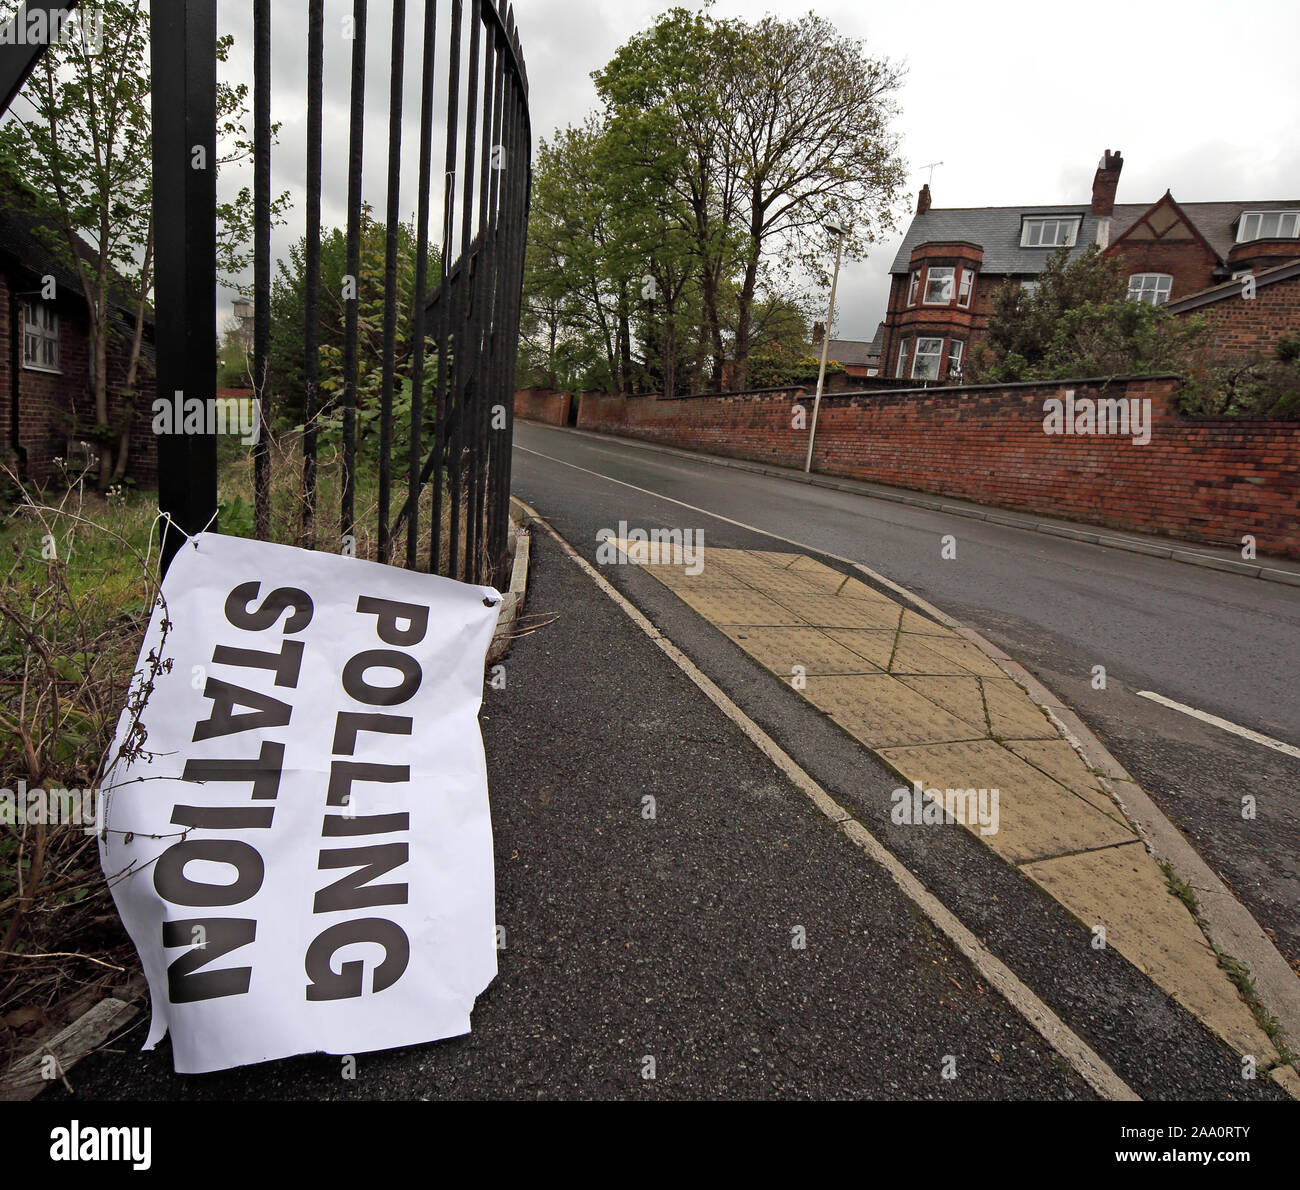 UK Polling station, open ready for voting, General Election, sign ripped down, voter apathy, Winnington Rec, Park Road, Northwich,Cheshire, CW8 4EB Stock Photo